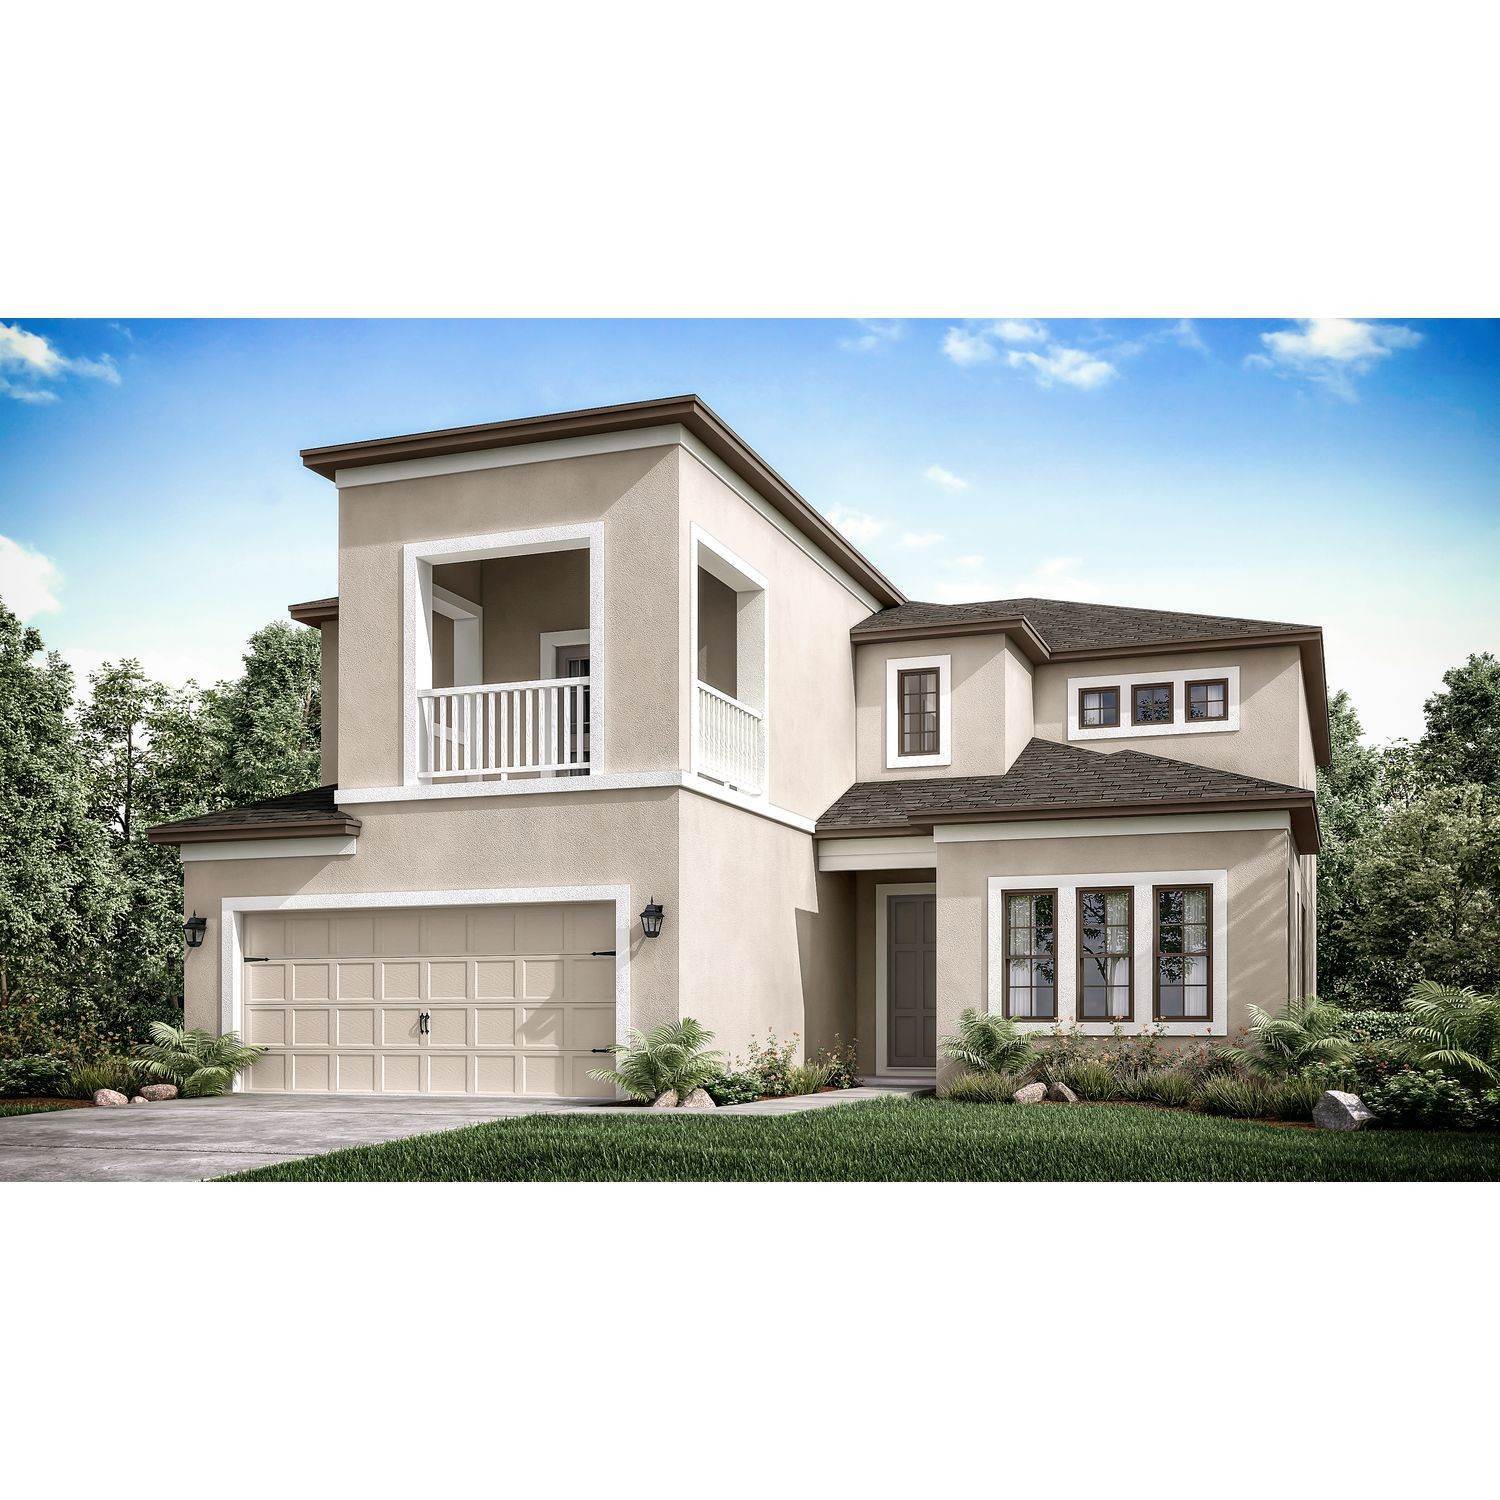 Single Family for Sale at Grandview At The Heights - Barbados 6255 Plateau Court BRADENTON, FLORIDA 34203 UNITED STATES